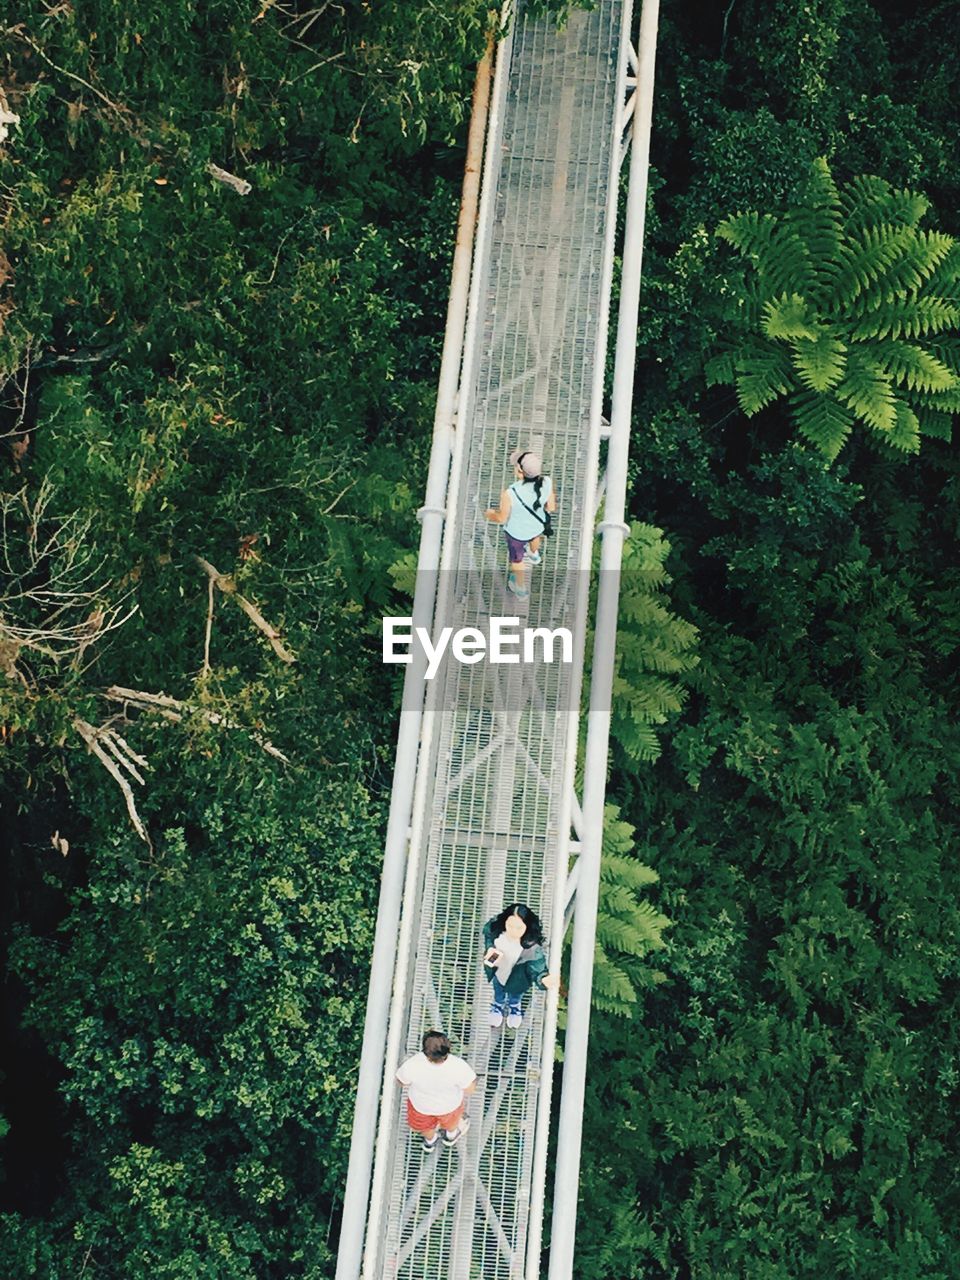 High angle view of people on suspension bridge over trees